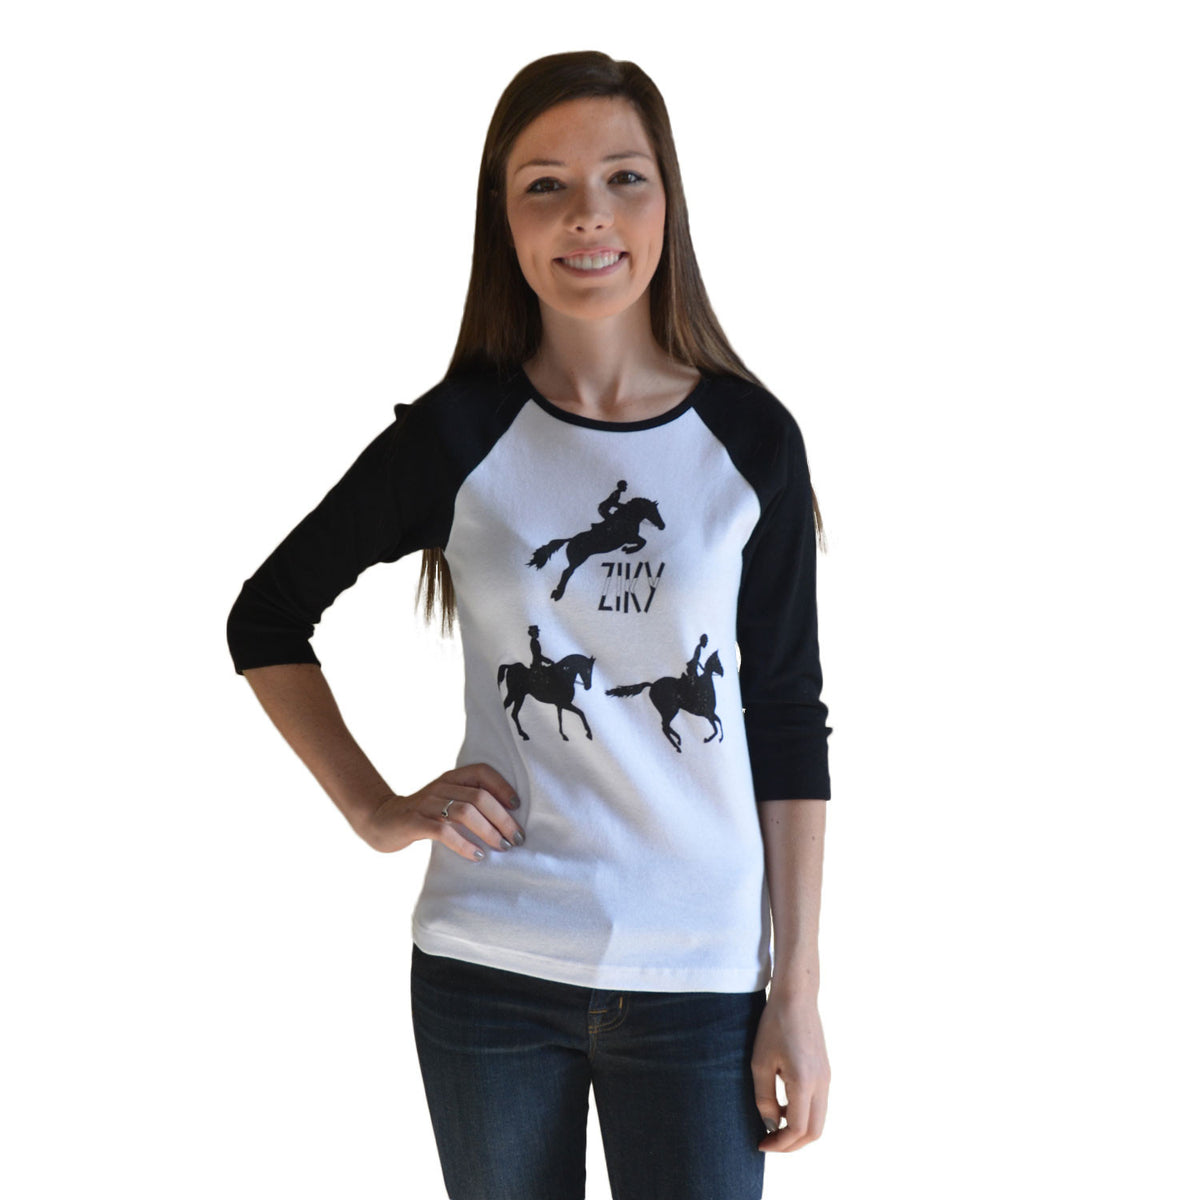 ZIKY equestrian rugby shirt